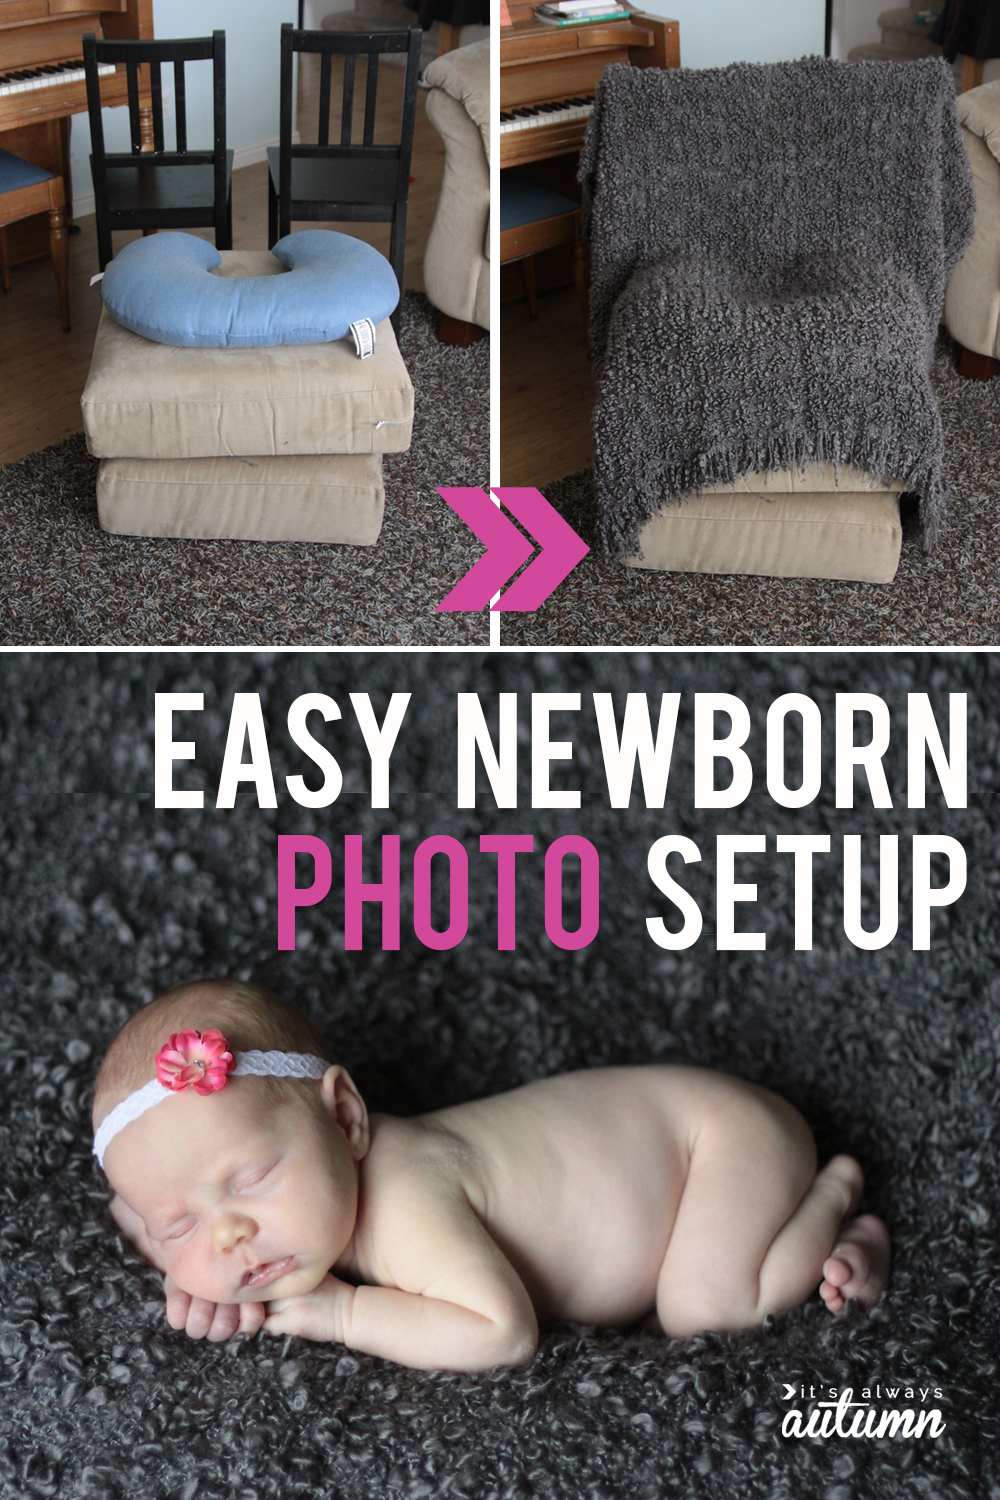 How to set up a home photo studio! Get great photos in your own home with these easy photo set ups.